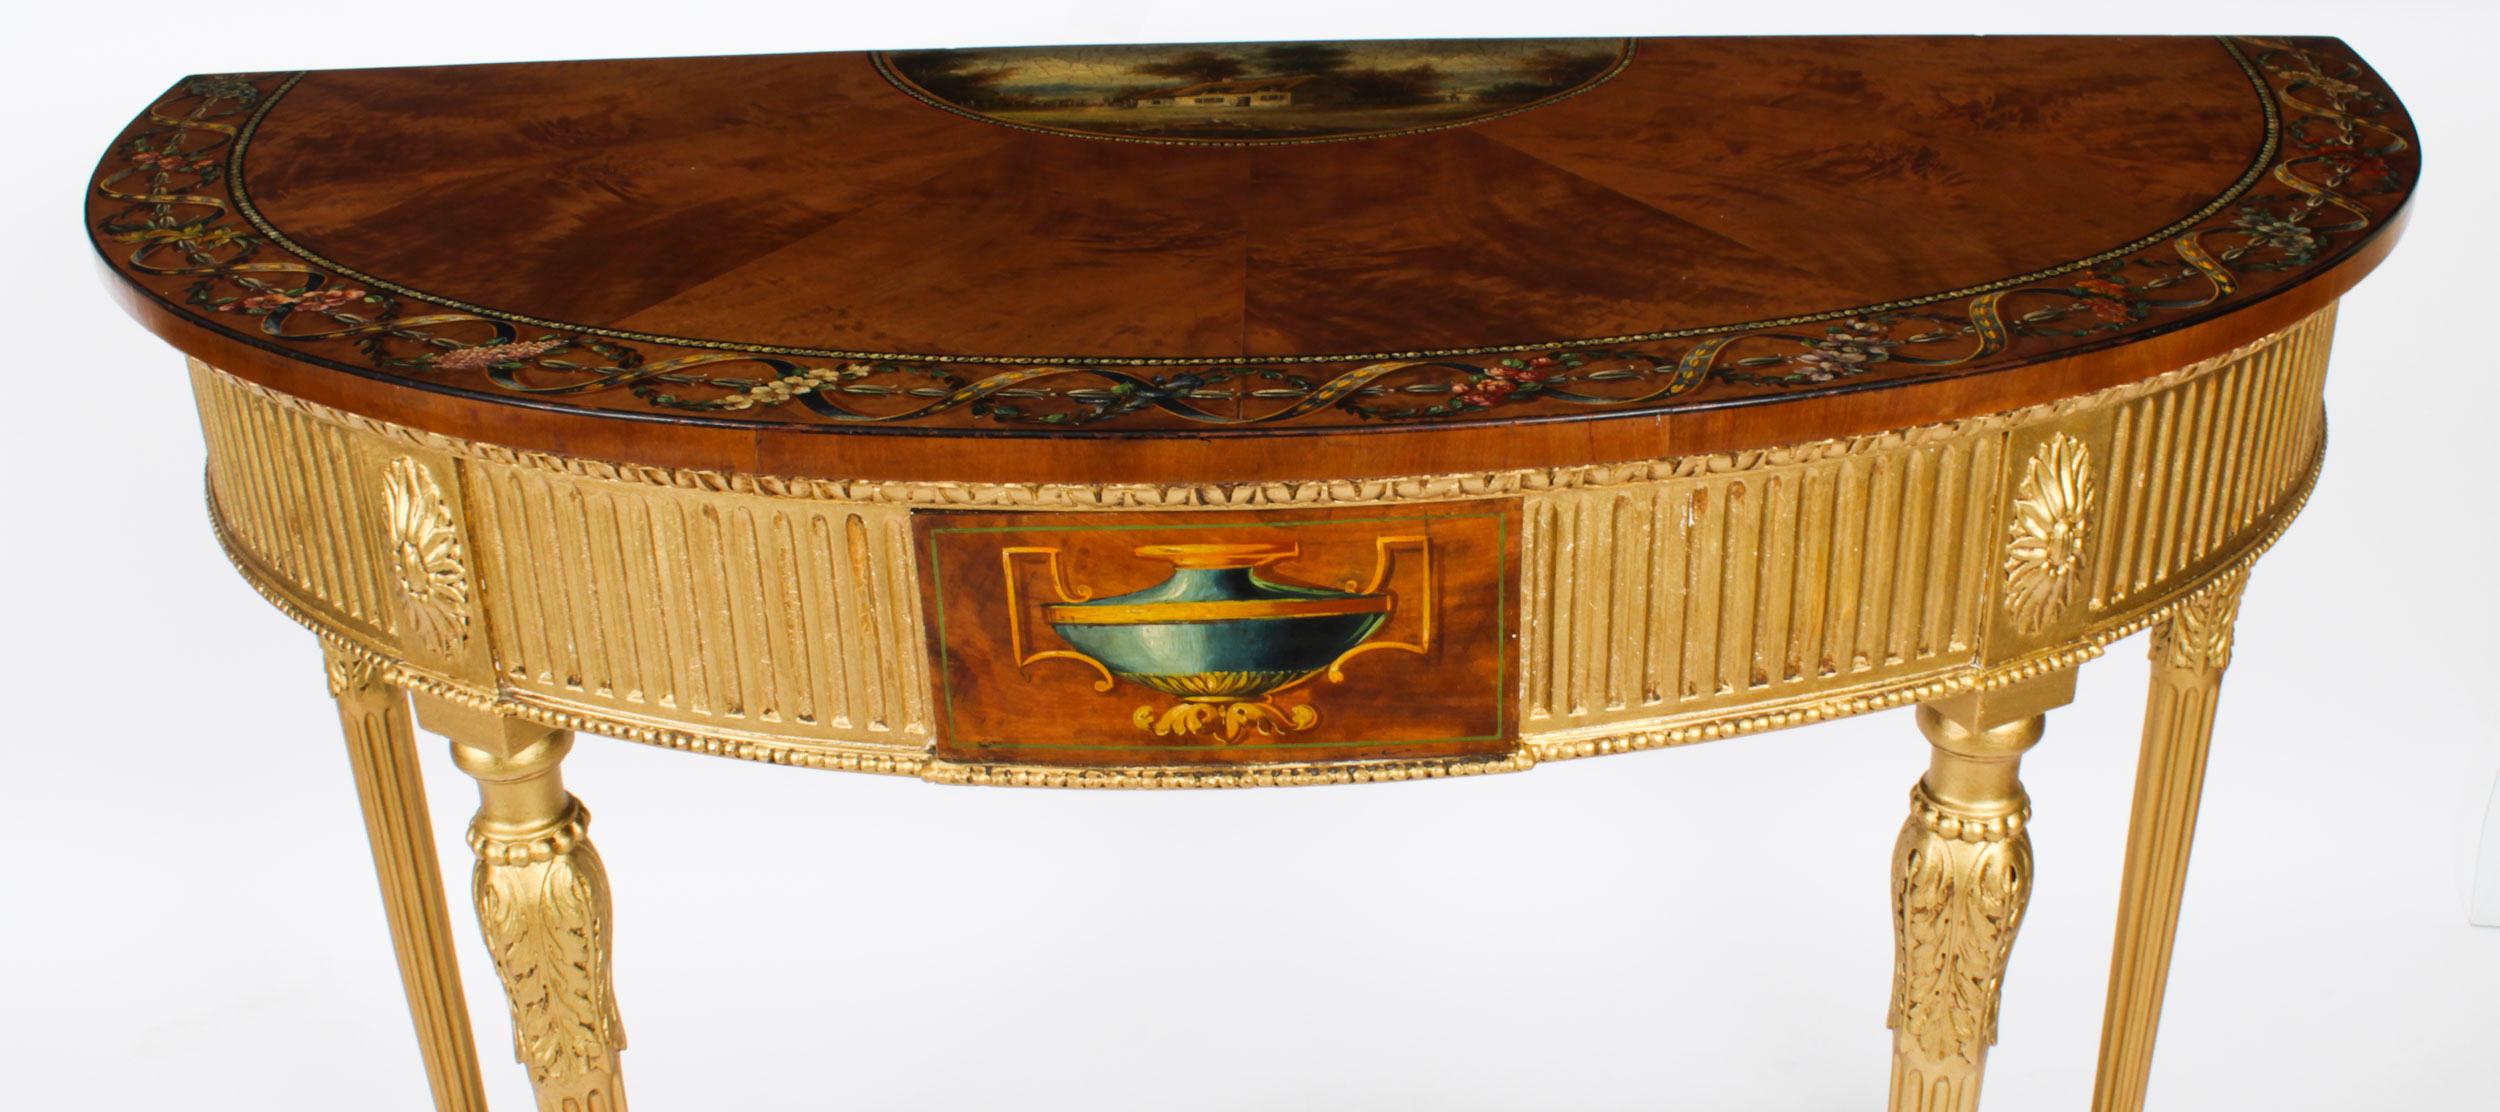 Antique Satinwood Hand Painted Demi-Lune Console Table 19th Century For Sale 3